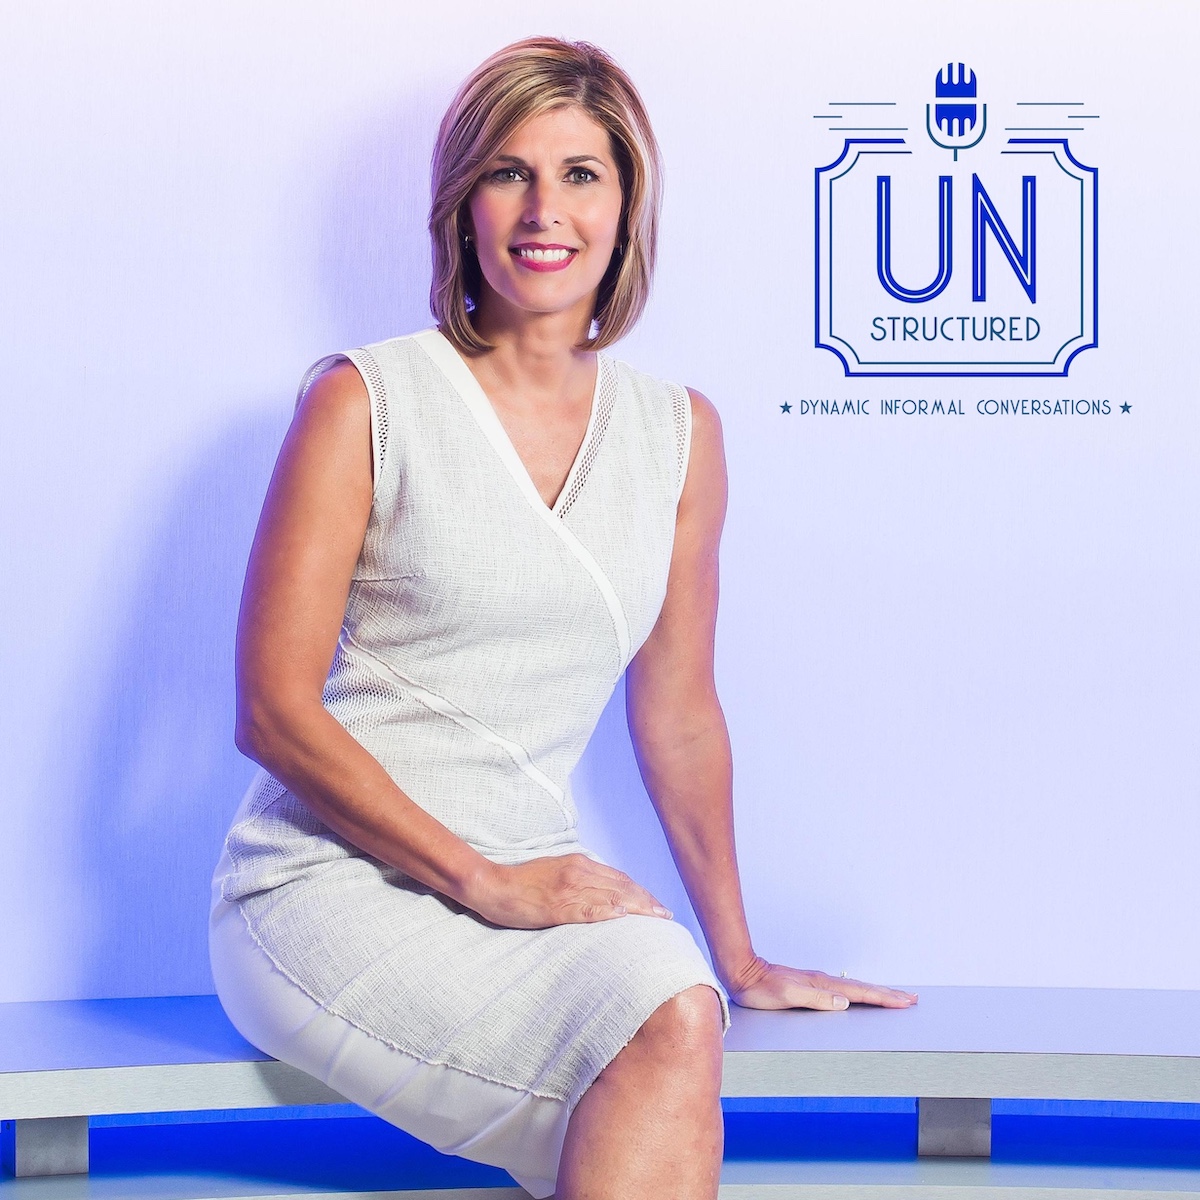 Sharyl Attkisson is an Award-winning journalist and author of the books Stonewalled and The Smear